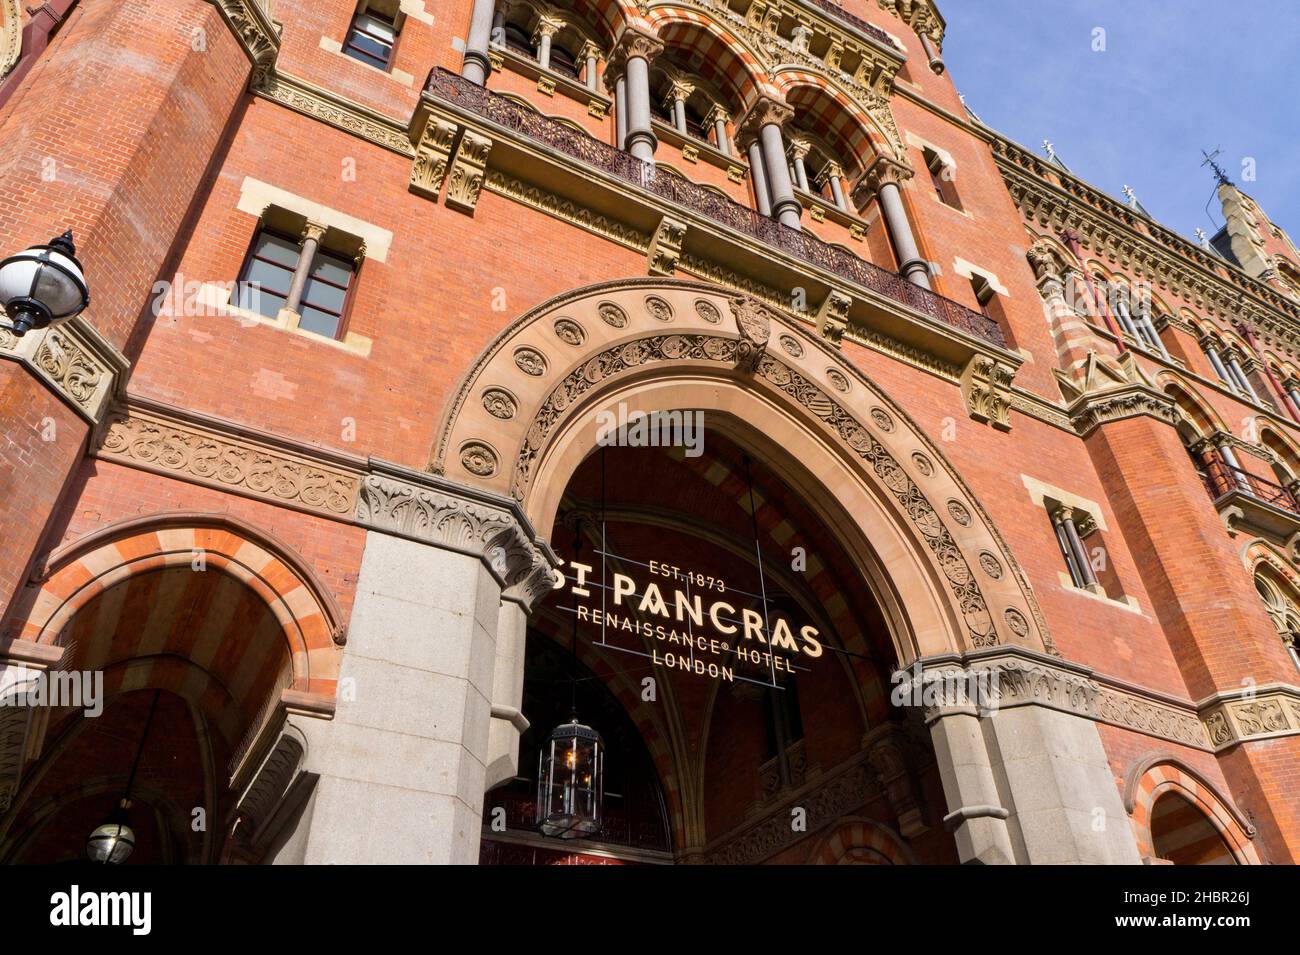 Exterior of the St Pancras Renaissance Hotel, London; a refurbishment of the former Midland Grand Hotel by George Gilbert Scott from 1873 Stock Photo